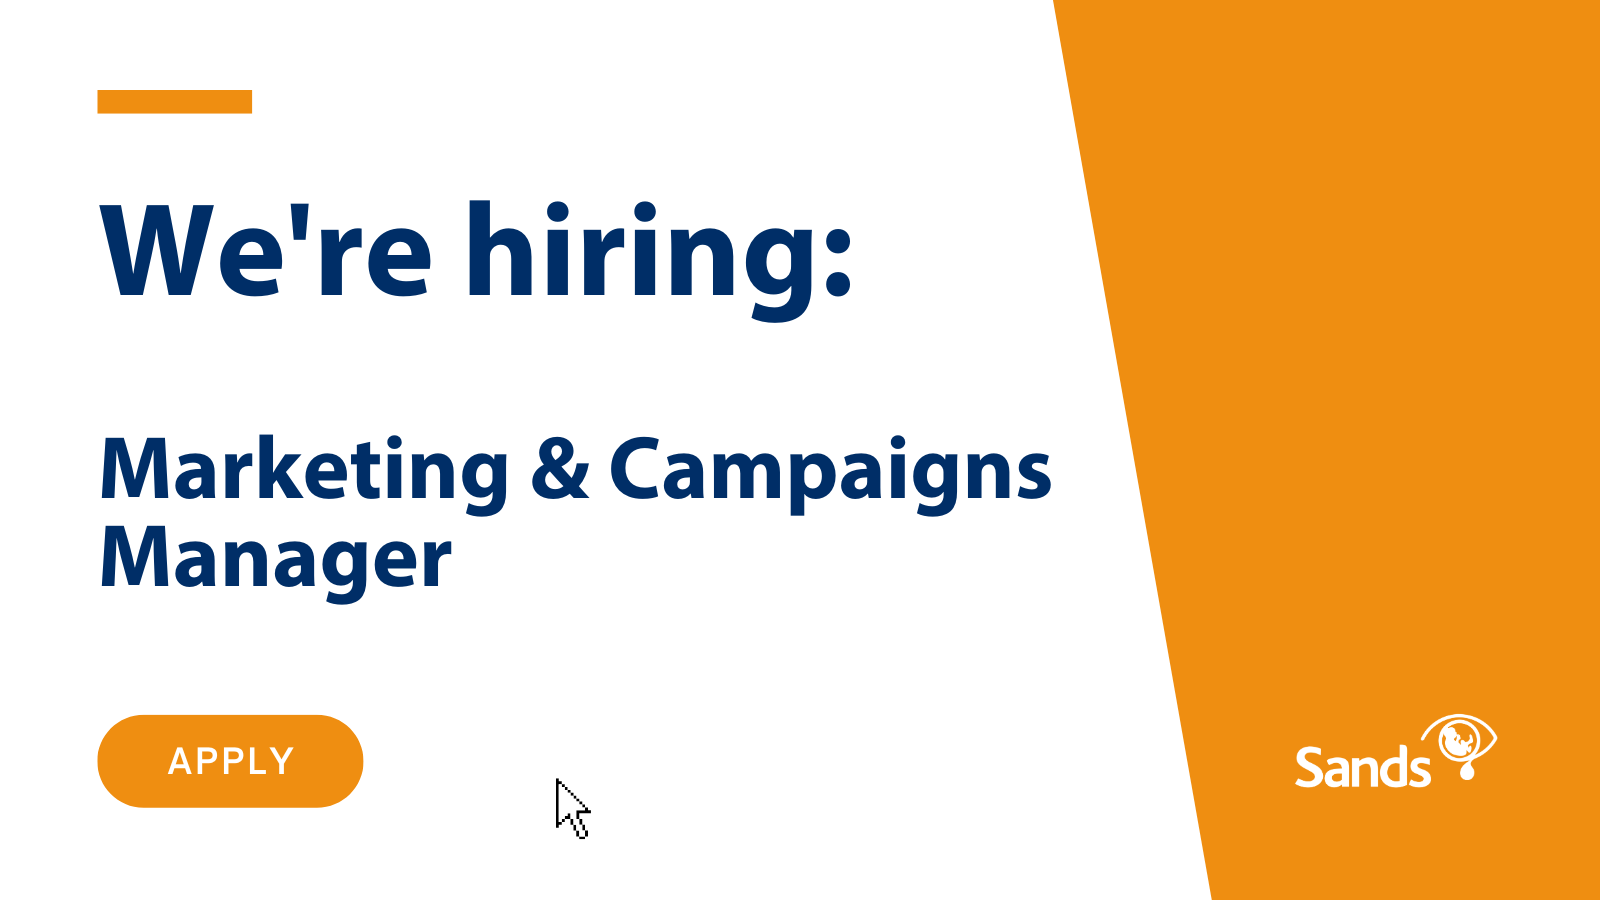 We are hiring Marketing and Campaigns Manager